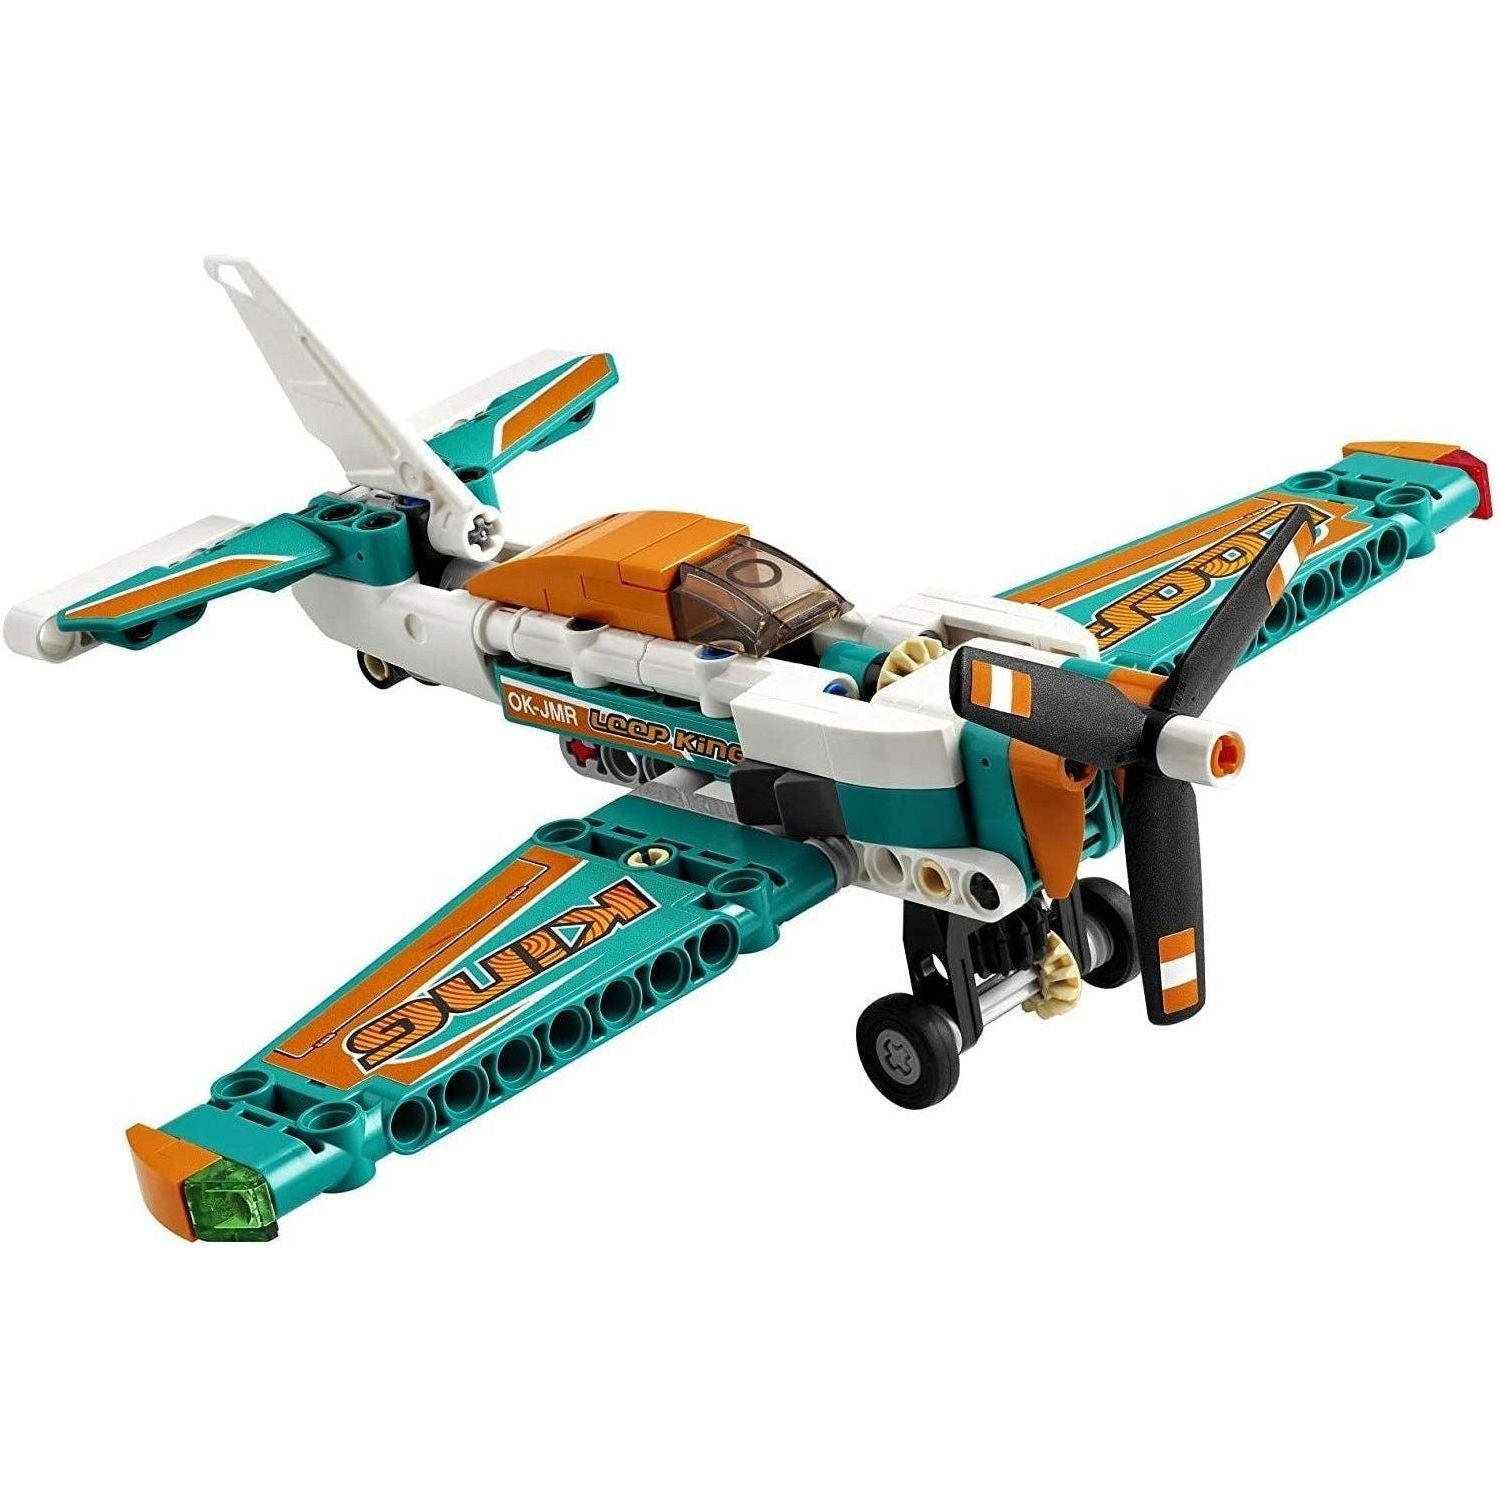 LEGO Technic Race Plane 42117 Building Kit for Boys and Girls Who Love Model Airplane Toys (154 Pieces) - BumbleToys - 6+ Years, 8+ Years, Boys, LEGO, OXE, Pre-Order, Technic